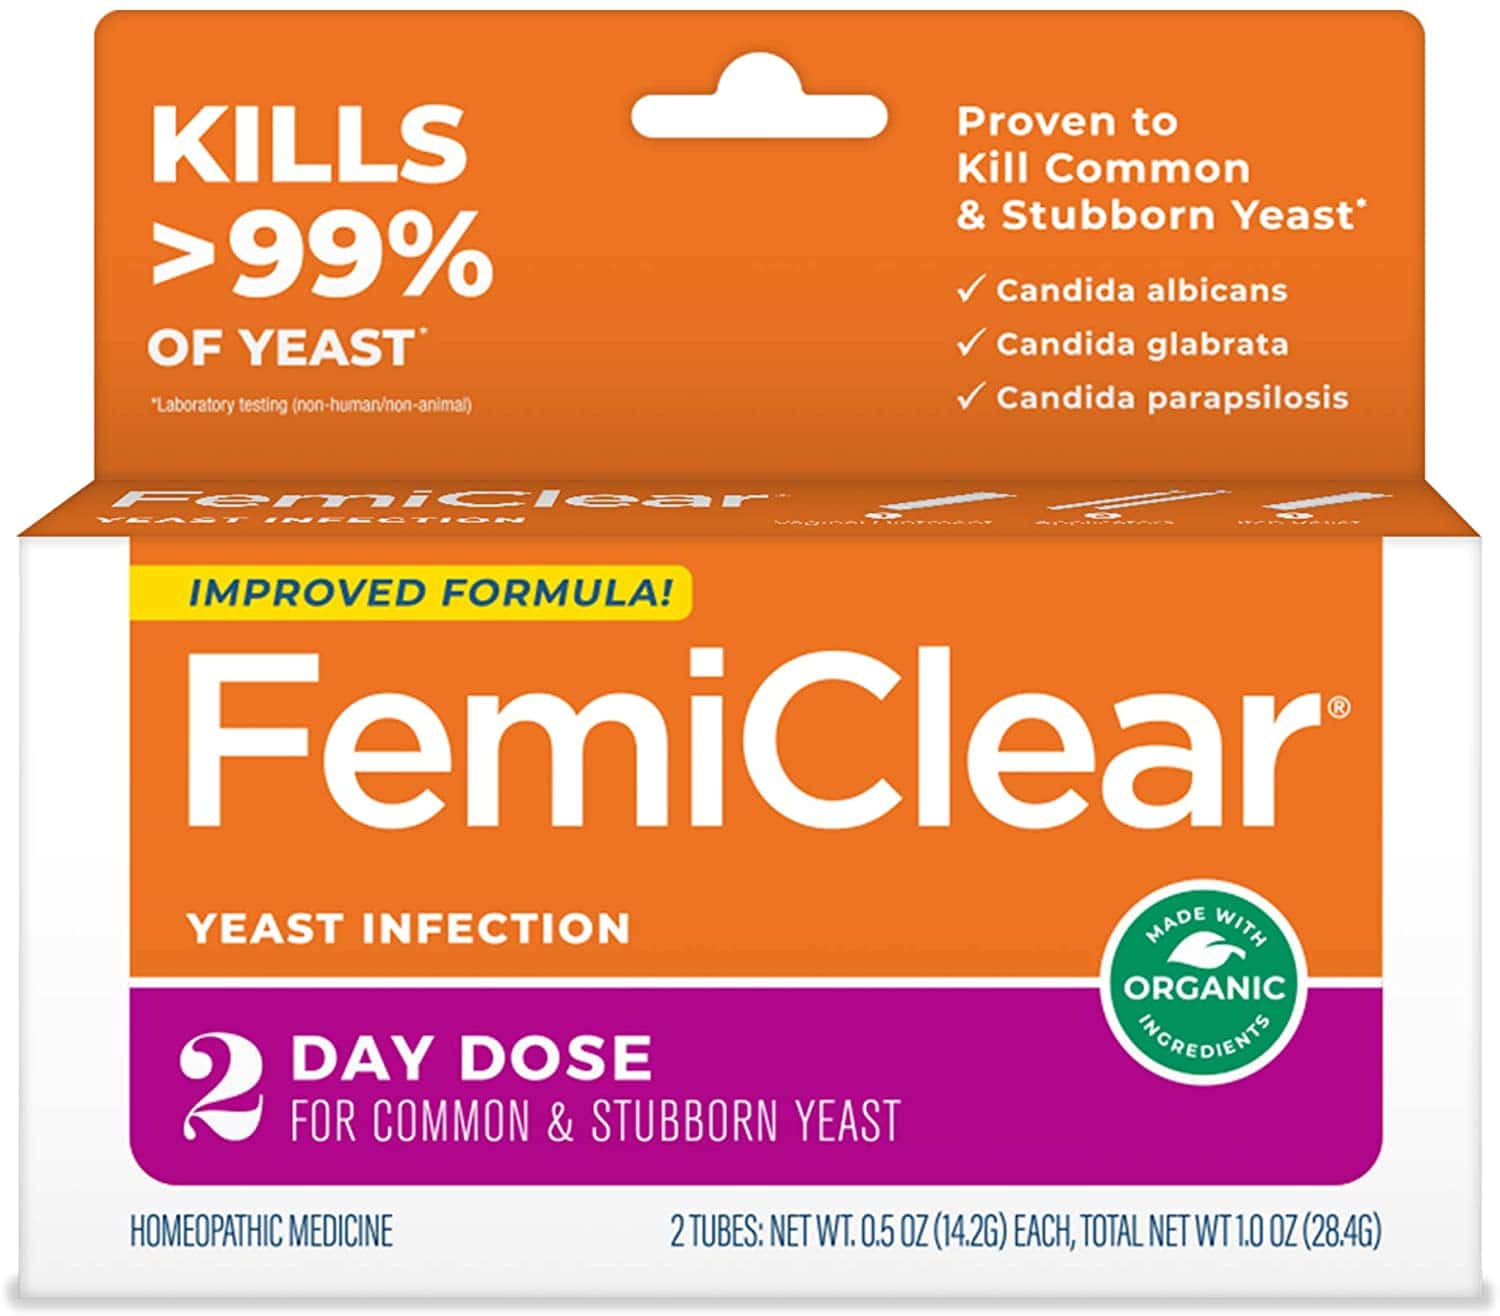 FemiClear is an organic topical ointment used for treating vaginal yeast infections